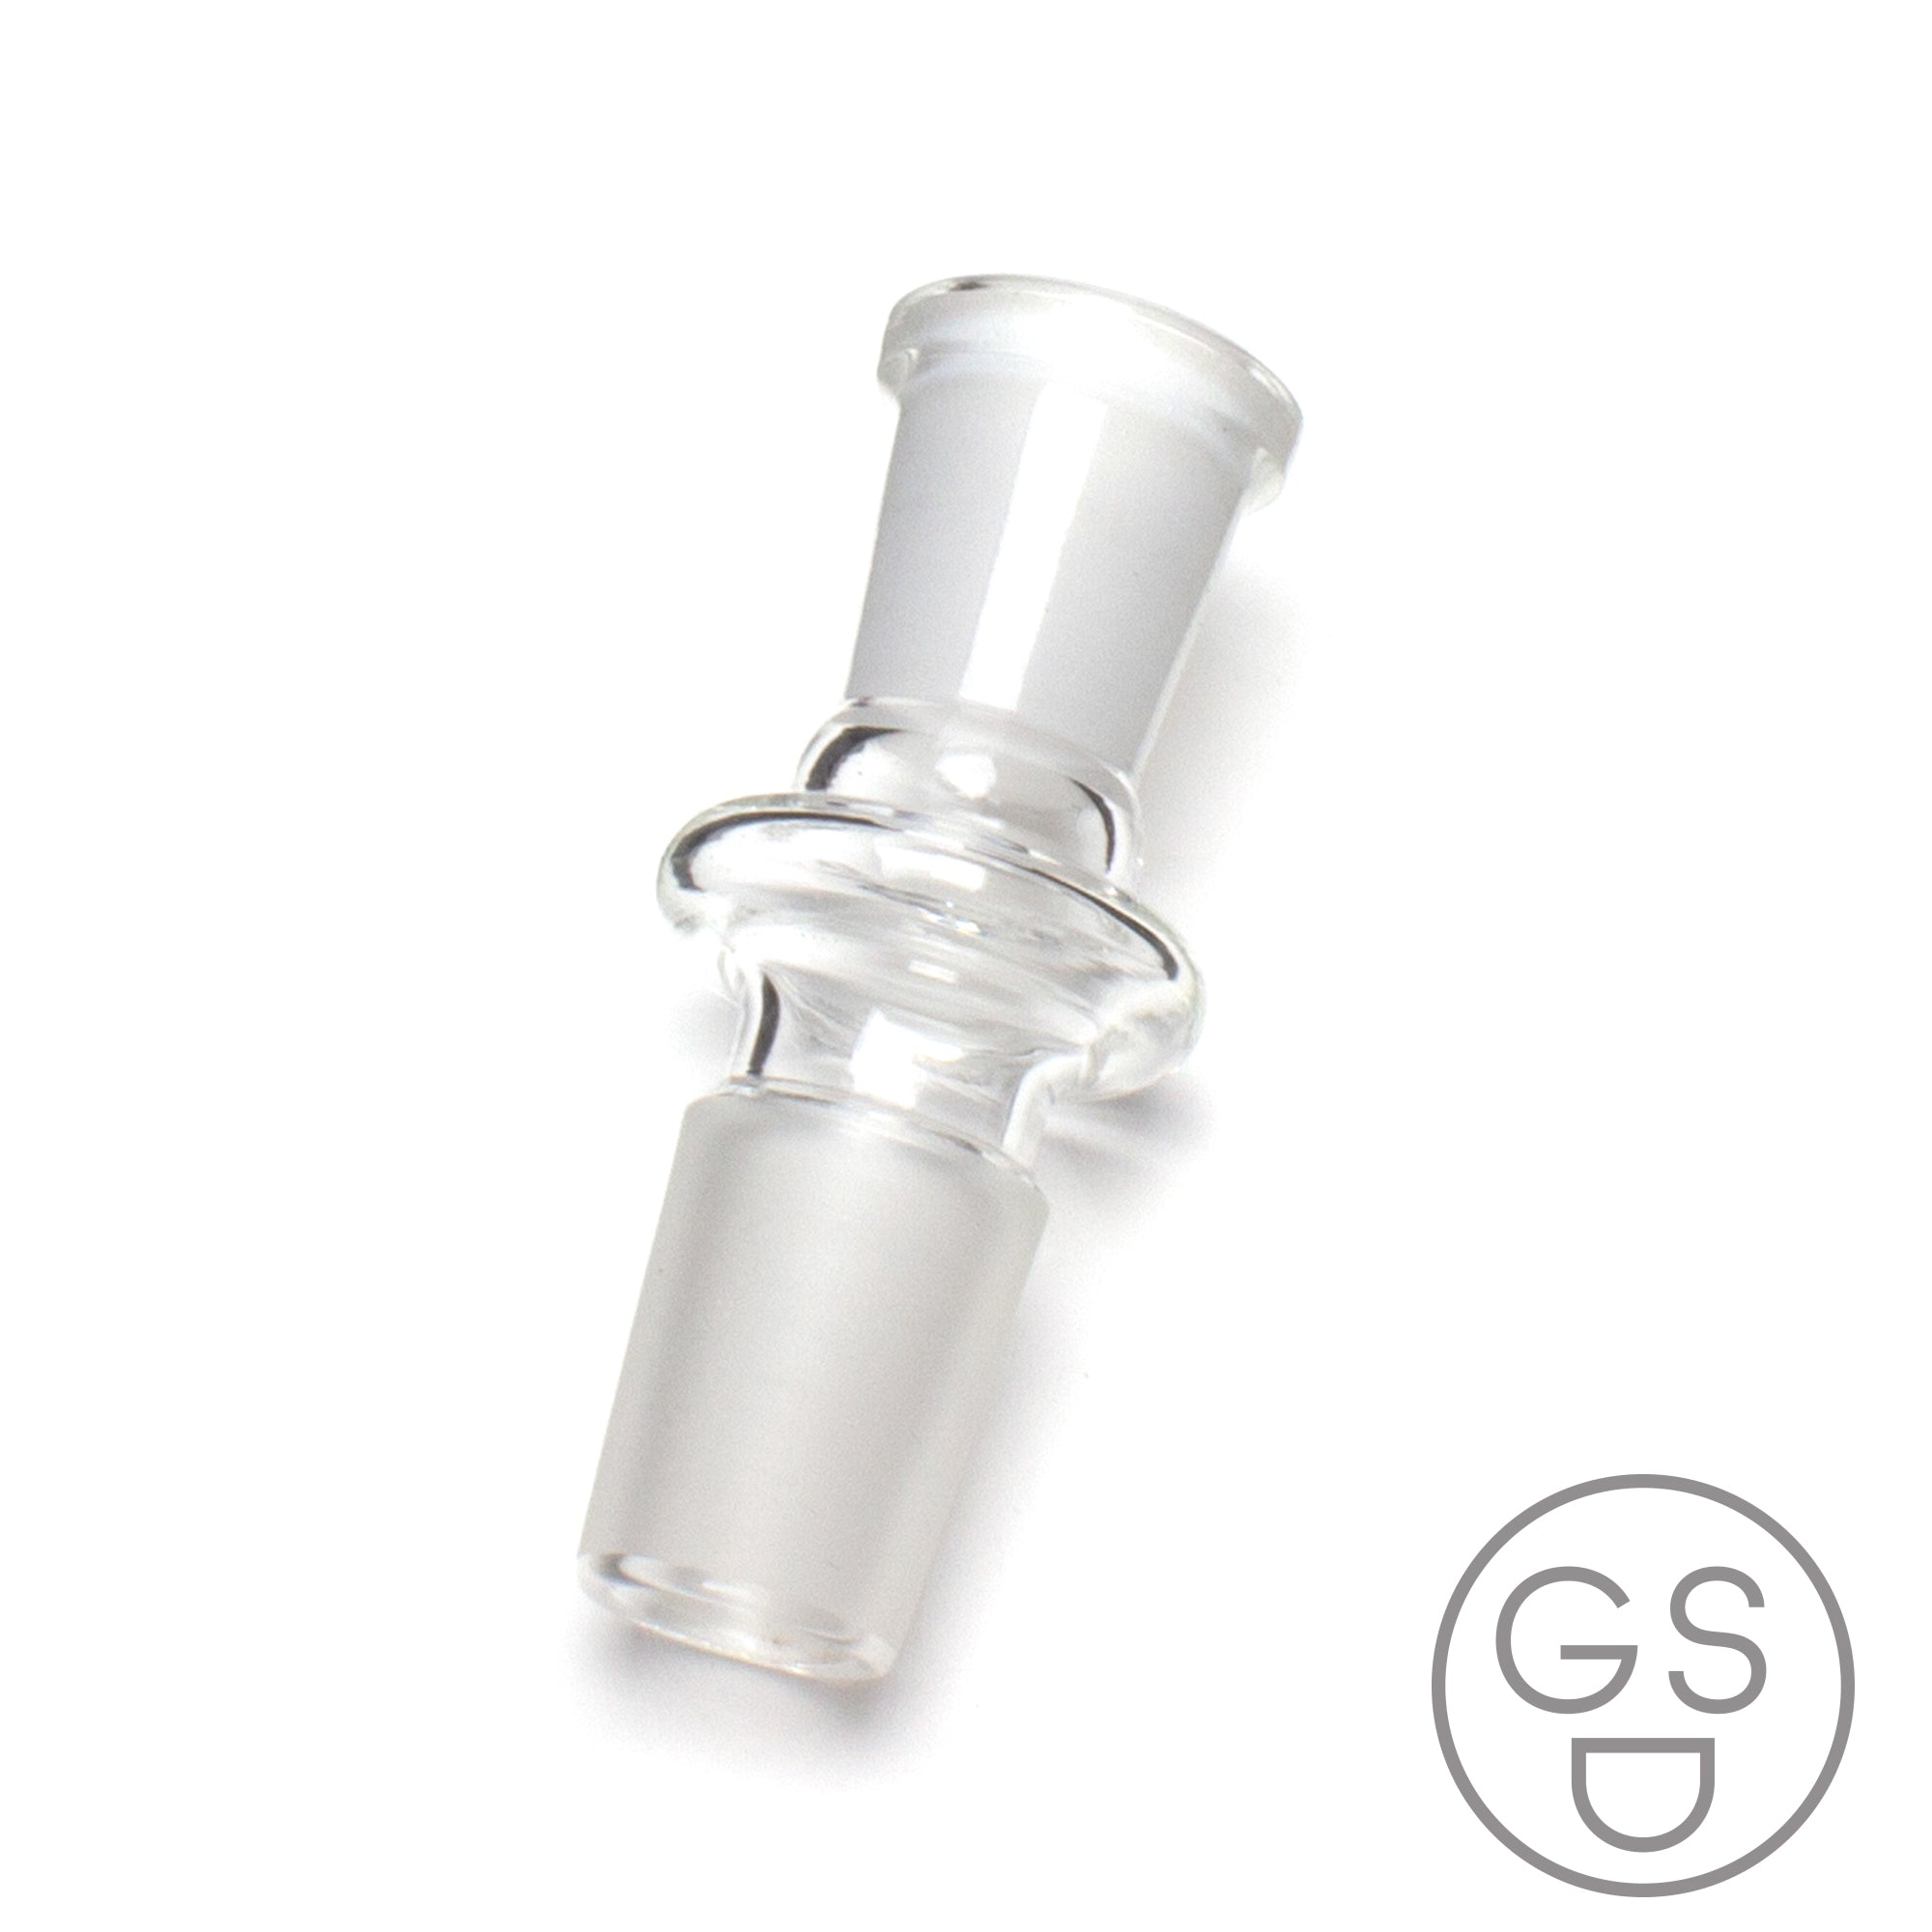 Male To Female Glass Adapter